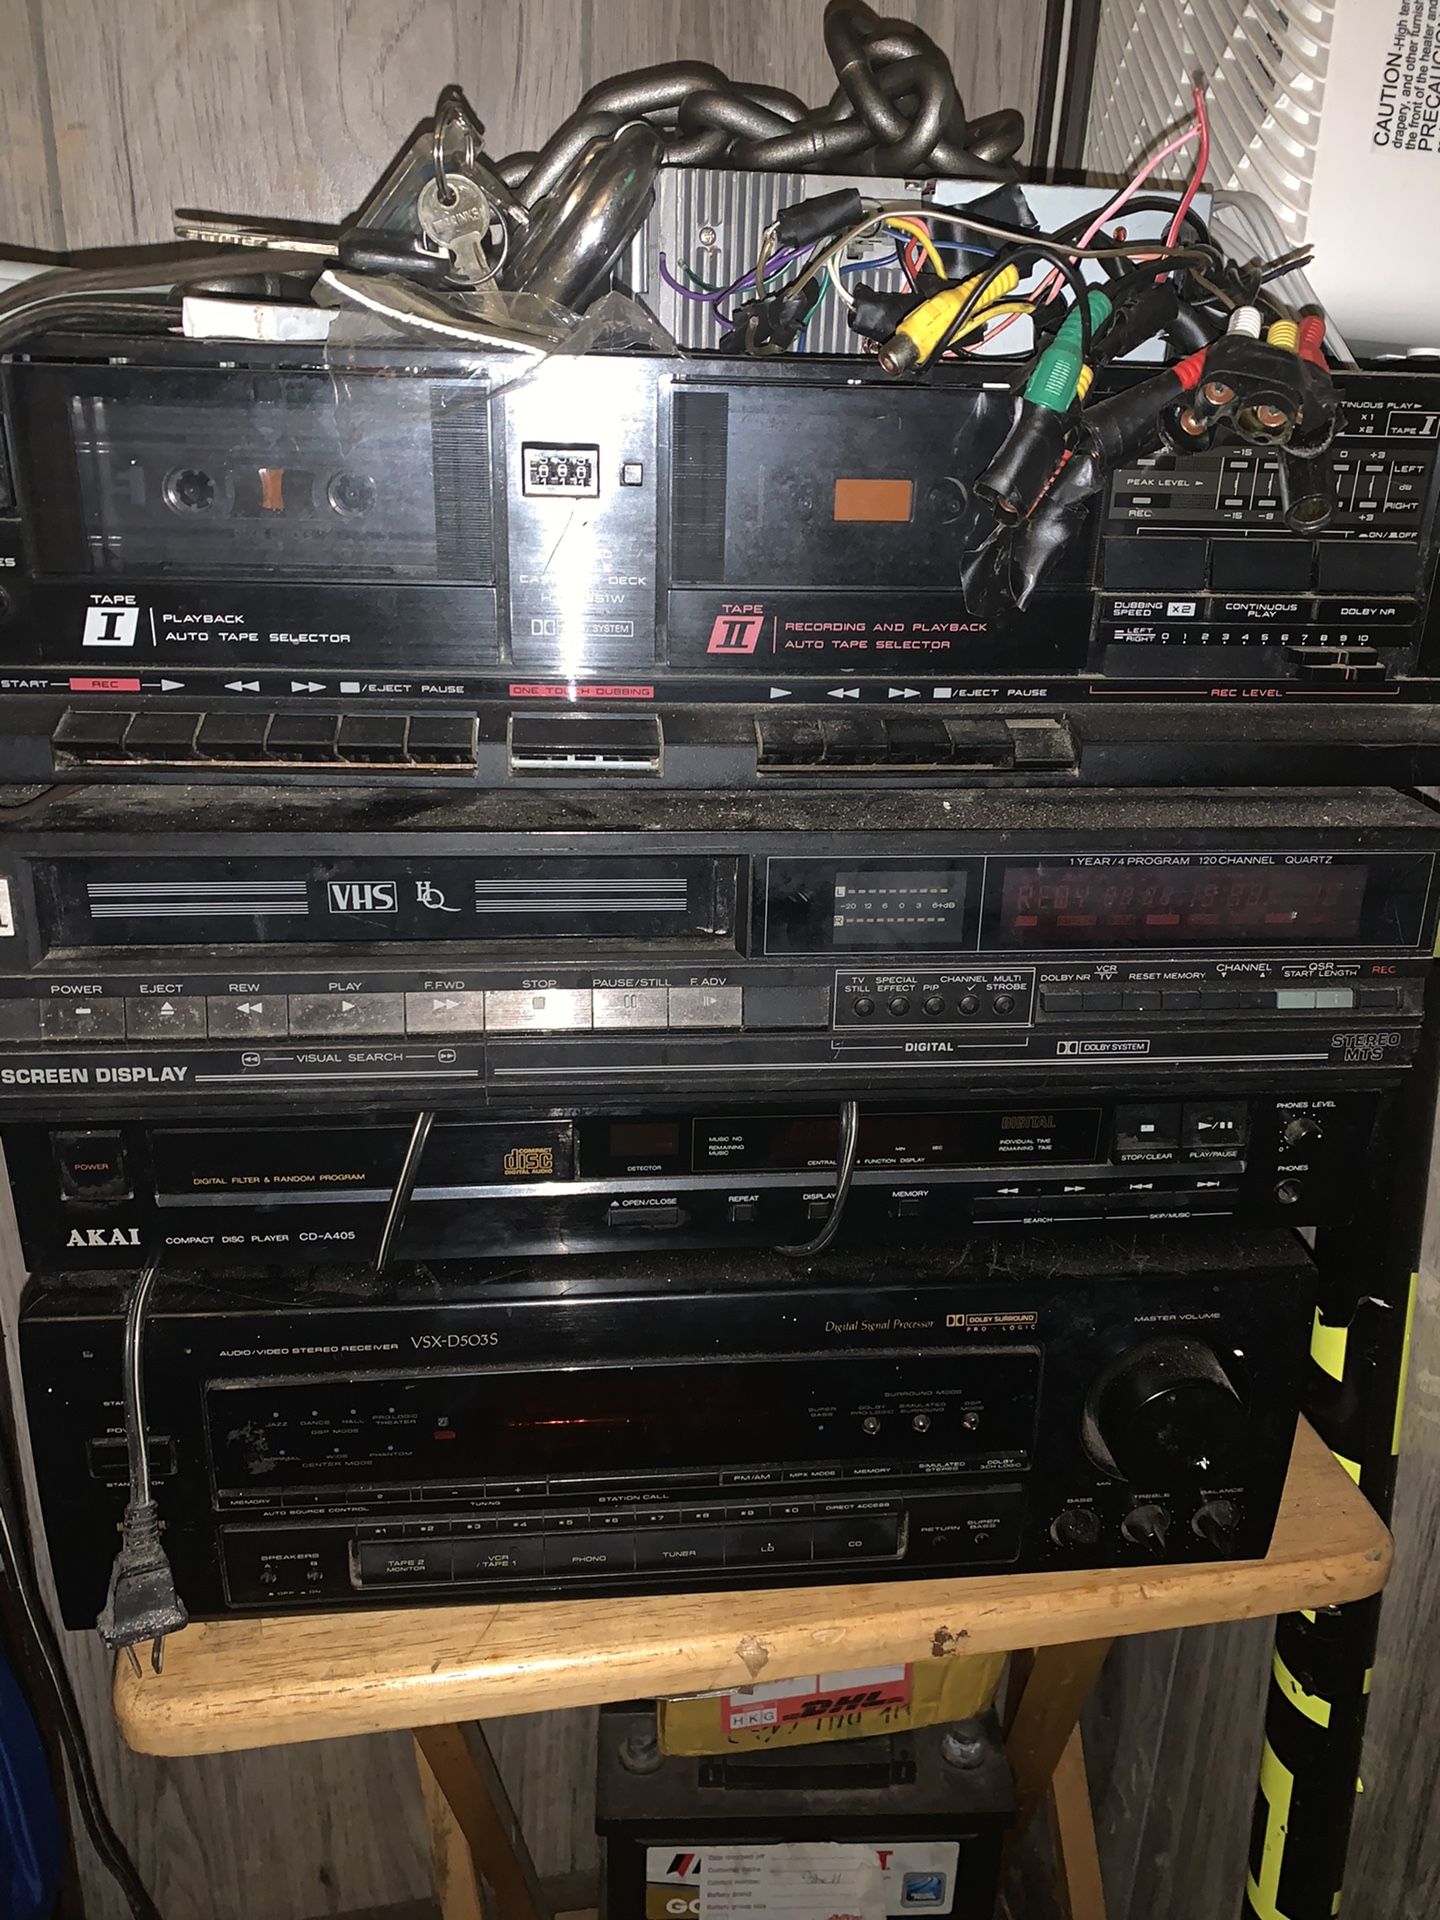 THIS IS ALL LEFT. VCR, TAPE DECK, CD PLAYER, AND RECIEVER